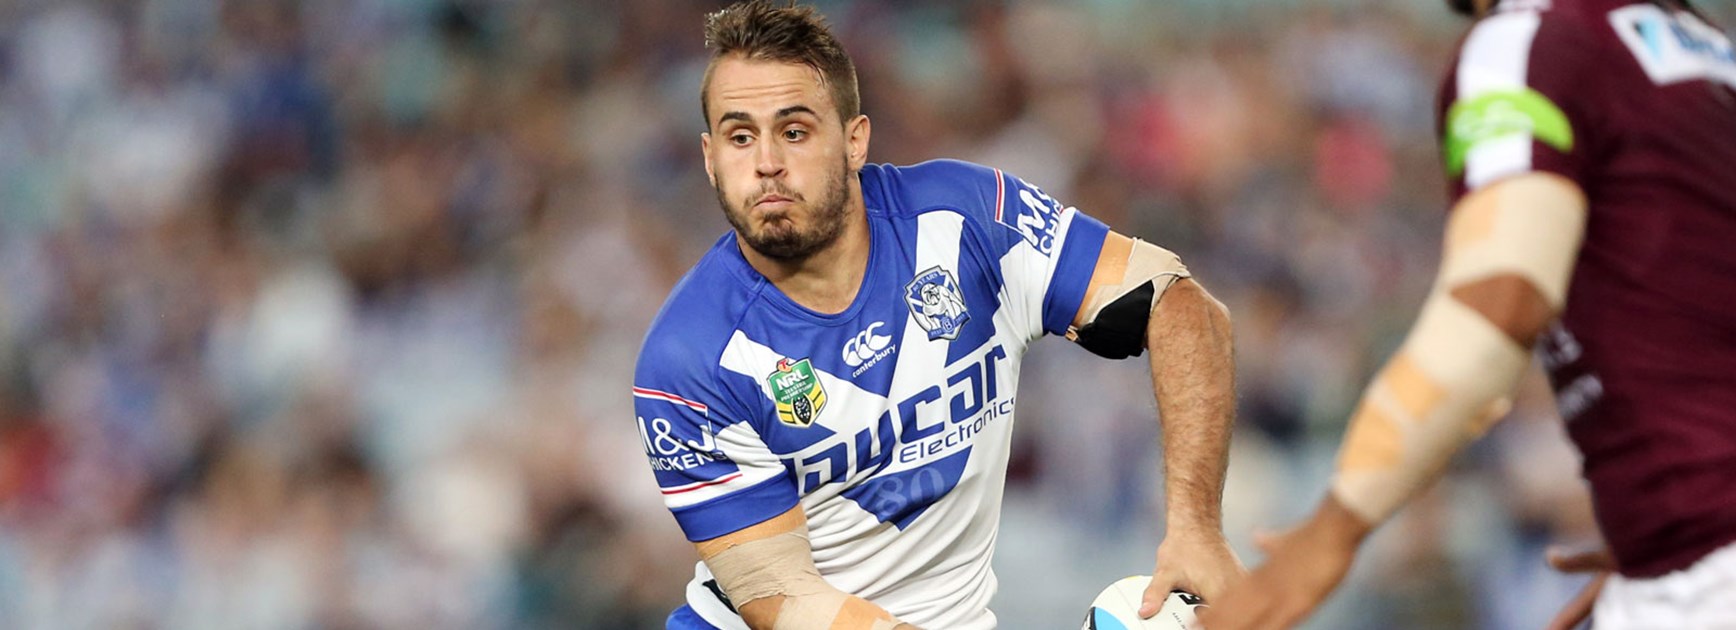 Josh Reynolds returned to form against the Sea Eagles in Round 7.